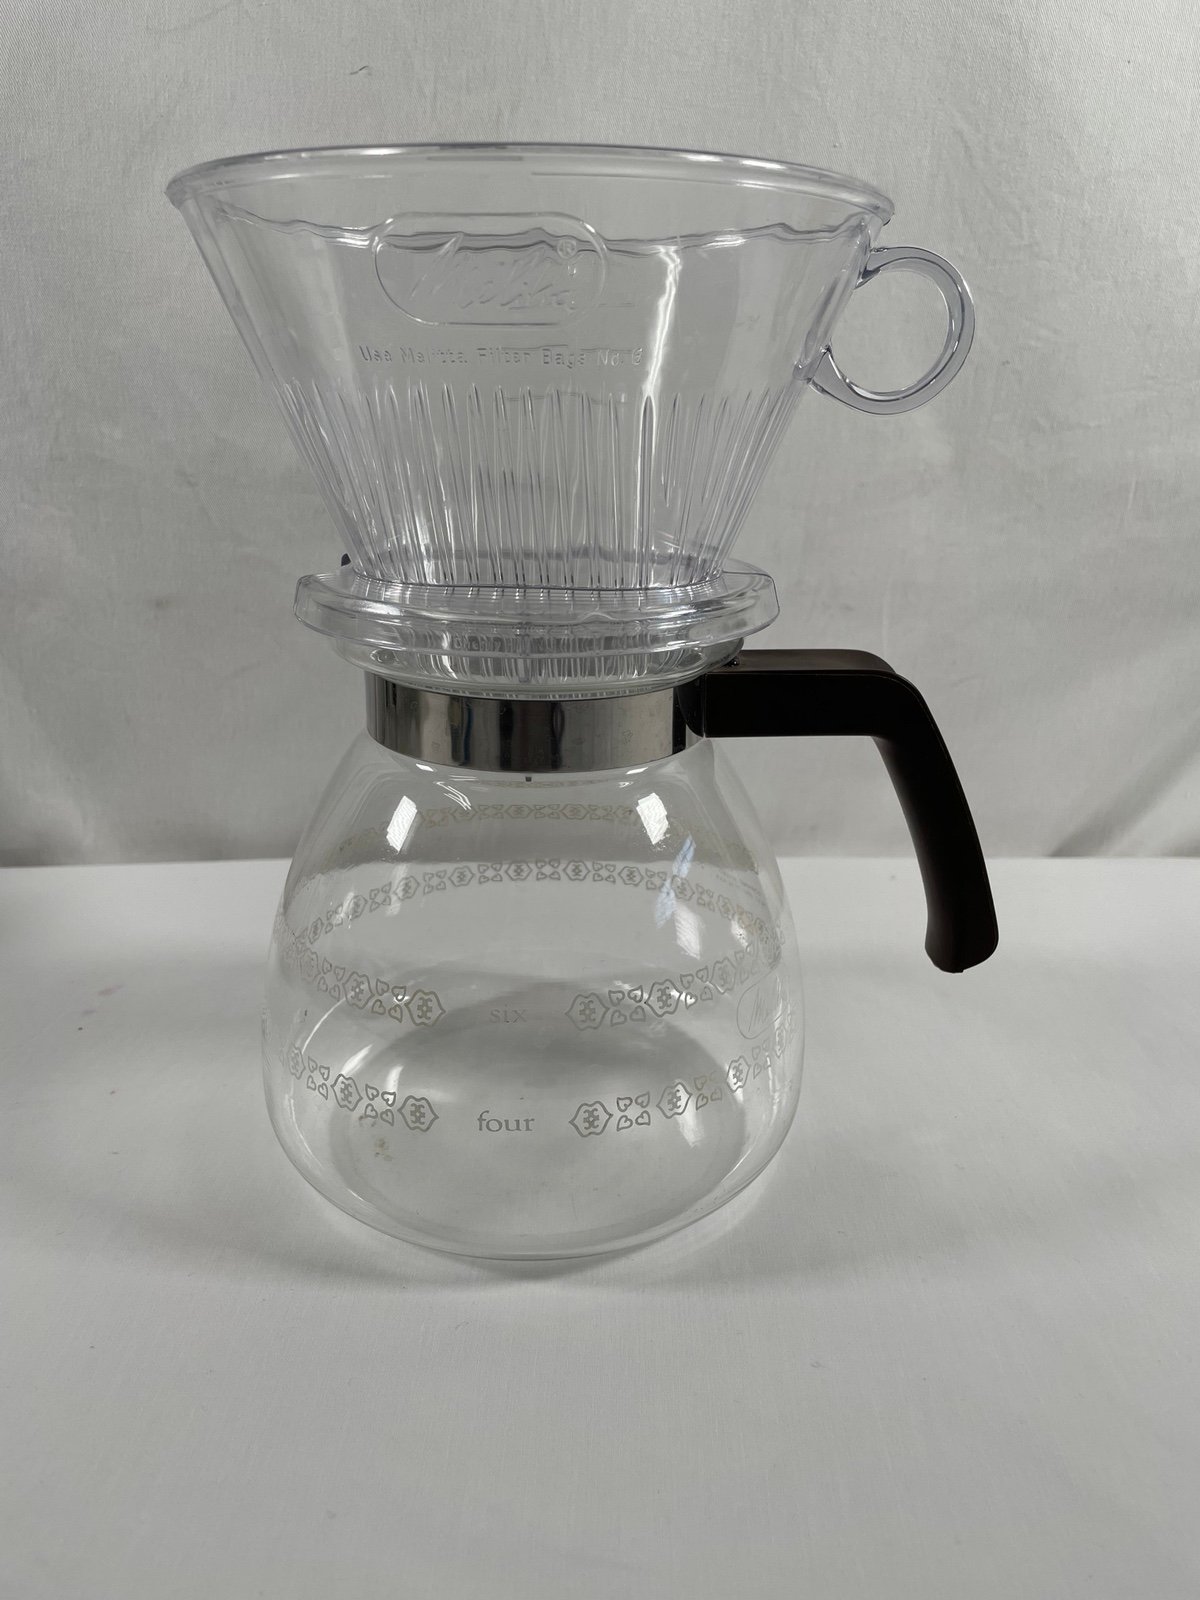 Melitta 6 Cup Coffee Glass Carafe w/Clear Pour Over Cone Filter Clean #2 RT2uP0ysC